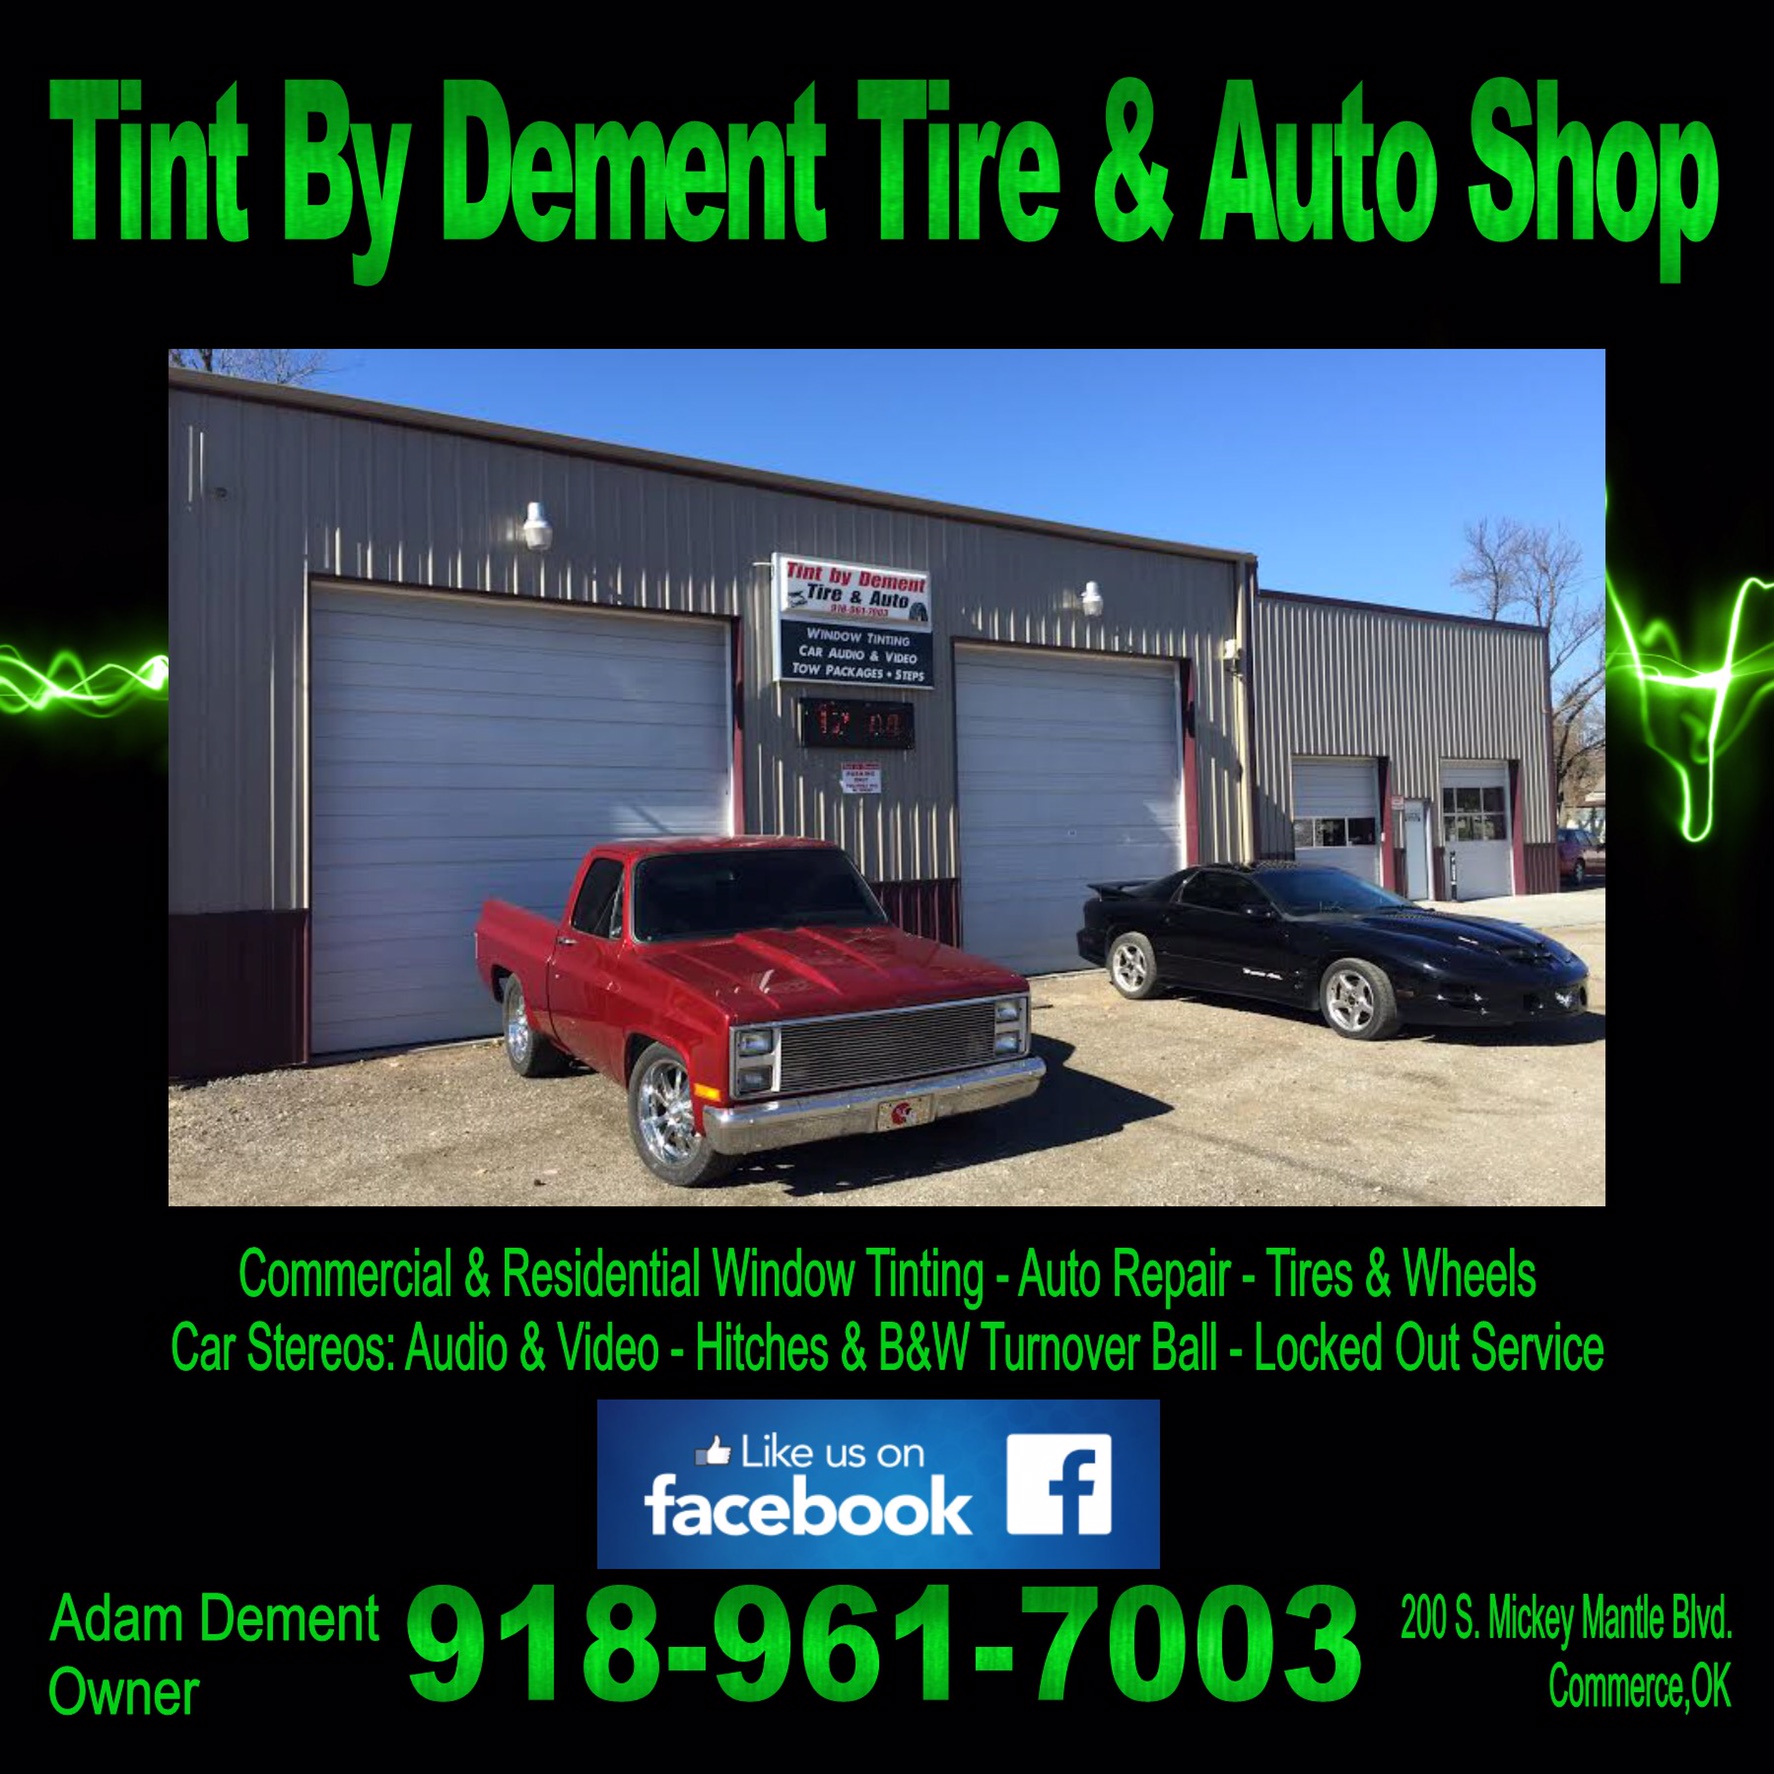 Tint by Dement Tire and Auto Sales 200 S Mickey Mantle Blvd, Commerce Oklahoma 74339